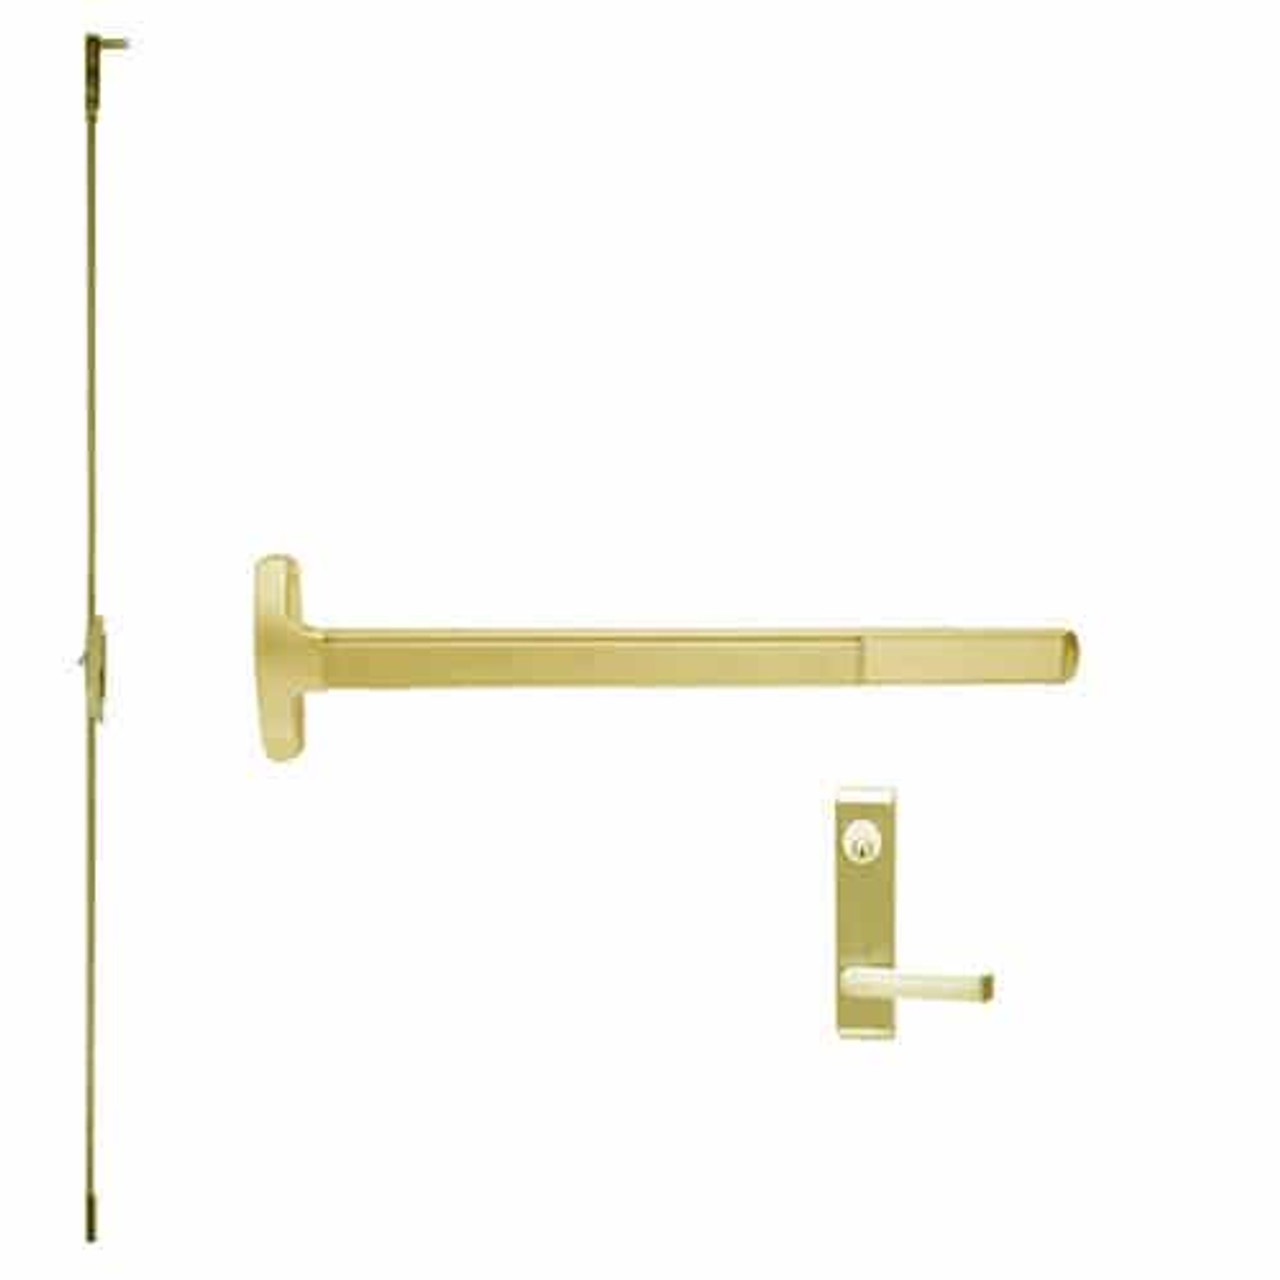 F-24-C-L-DANE-US3-3-LHR Falcon Exit Device in Polished Brass